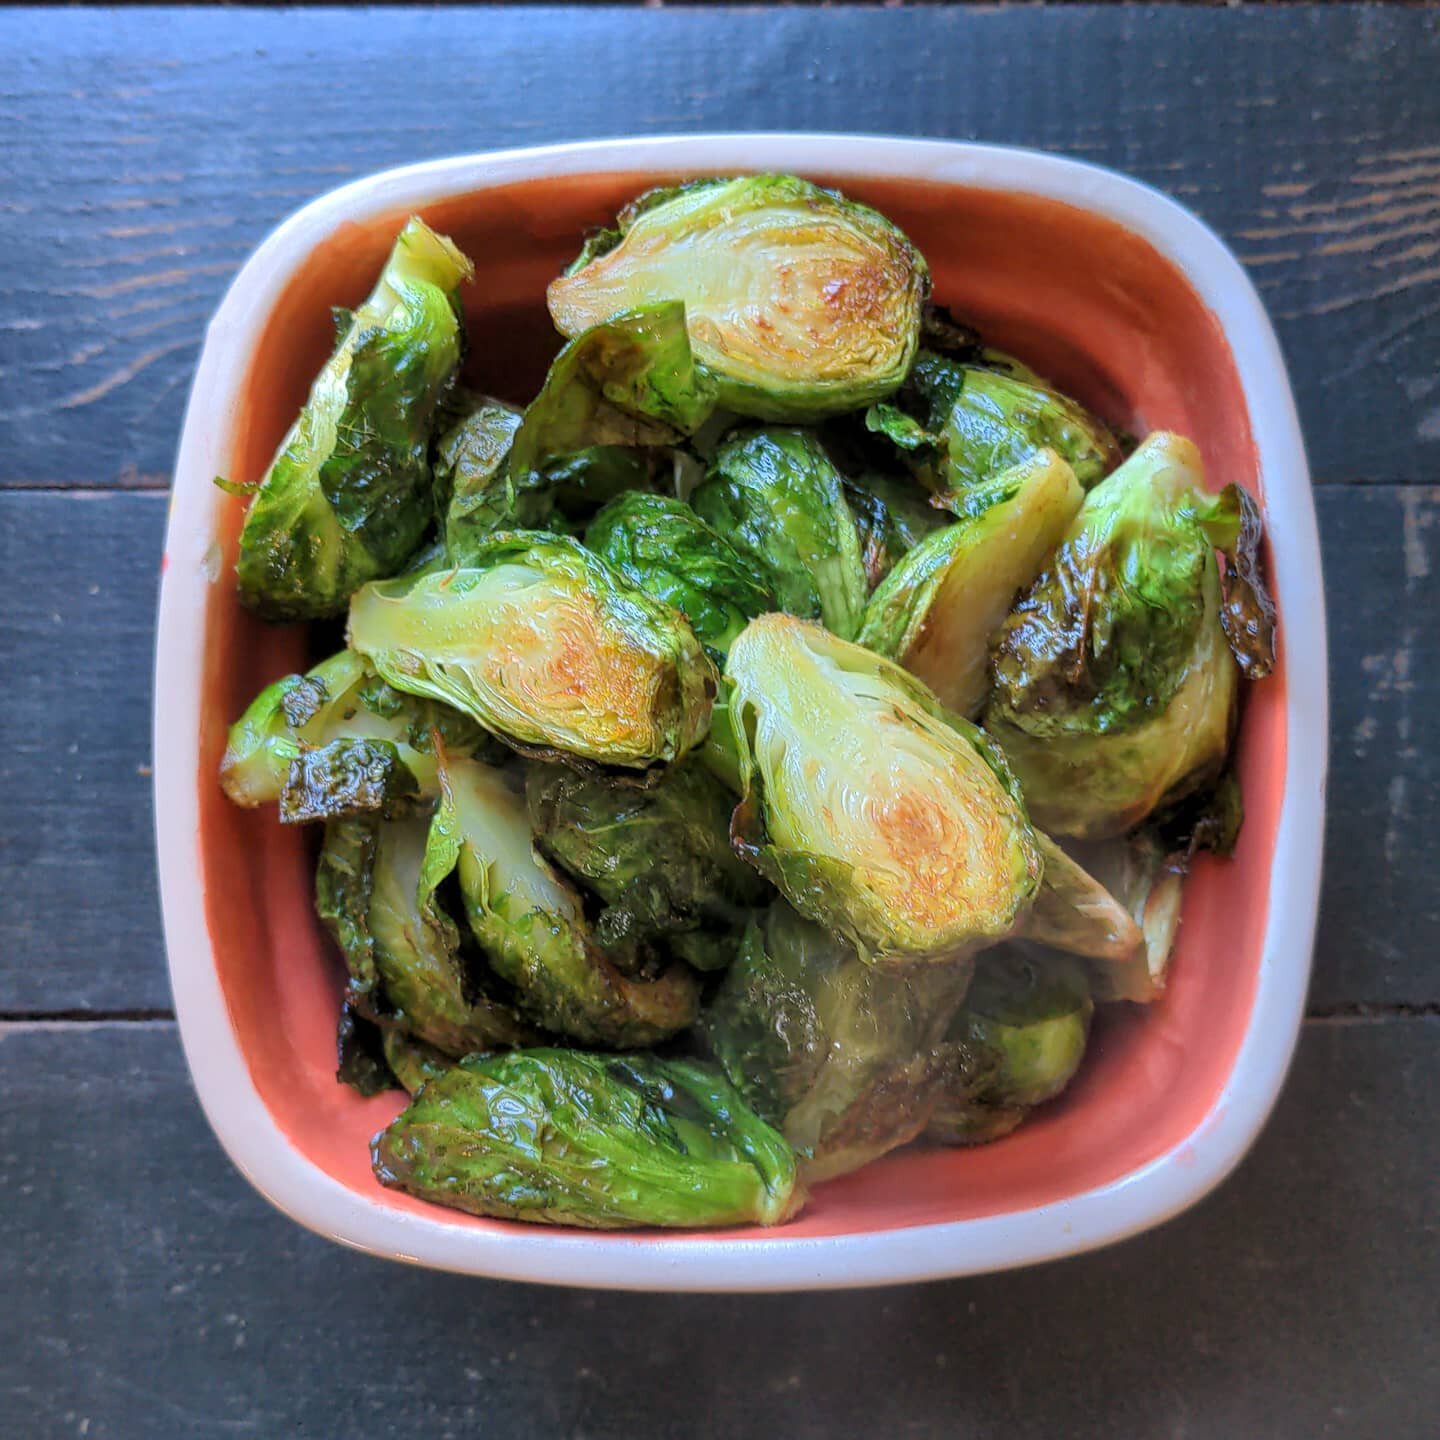 Roasted perfection. 😋

Are you on Team Brussels Sprouts? 

How do you like yours?